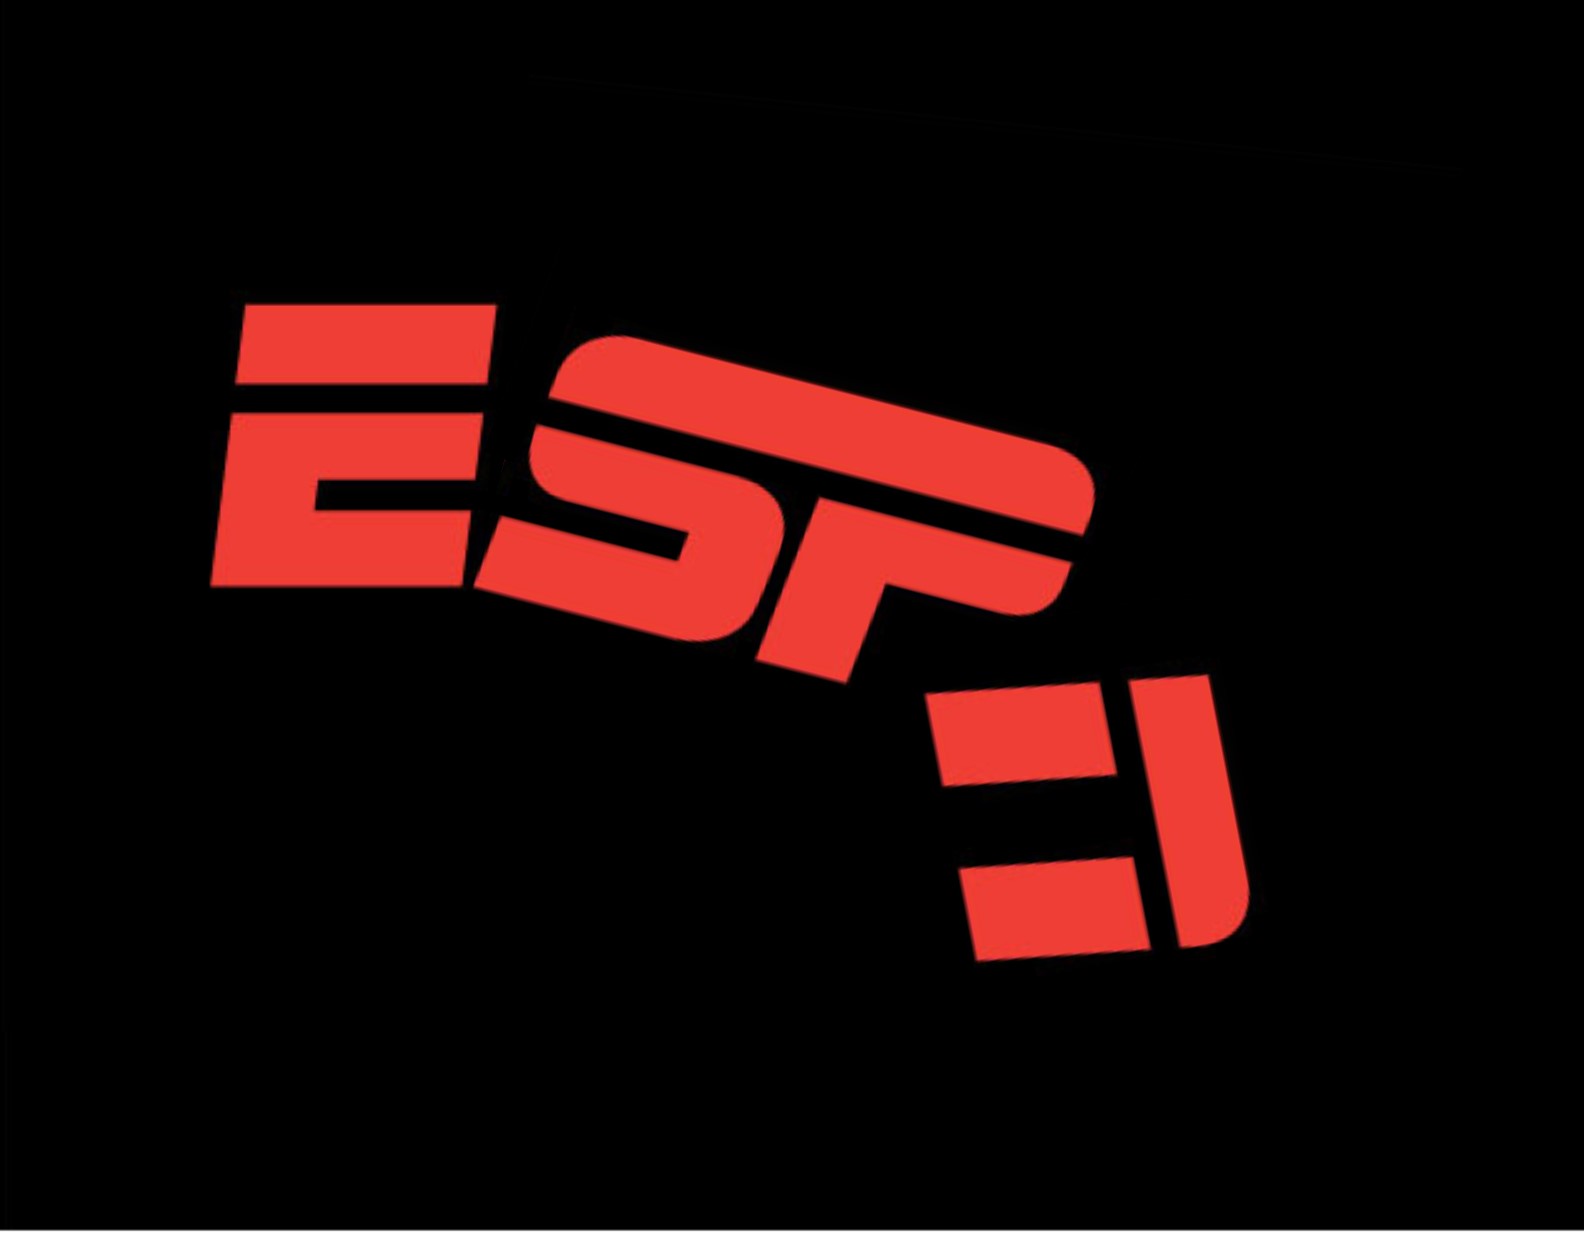 The Horrible, Very Bad, Terrible Week for ESPN and Conference Networks